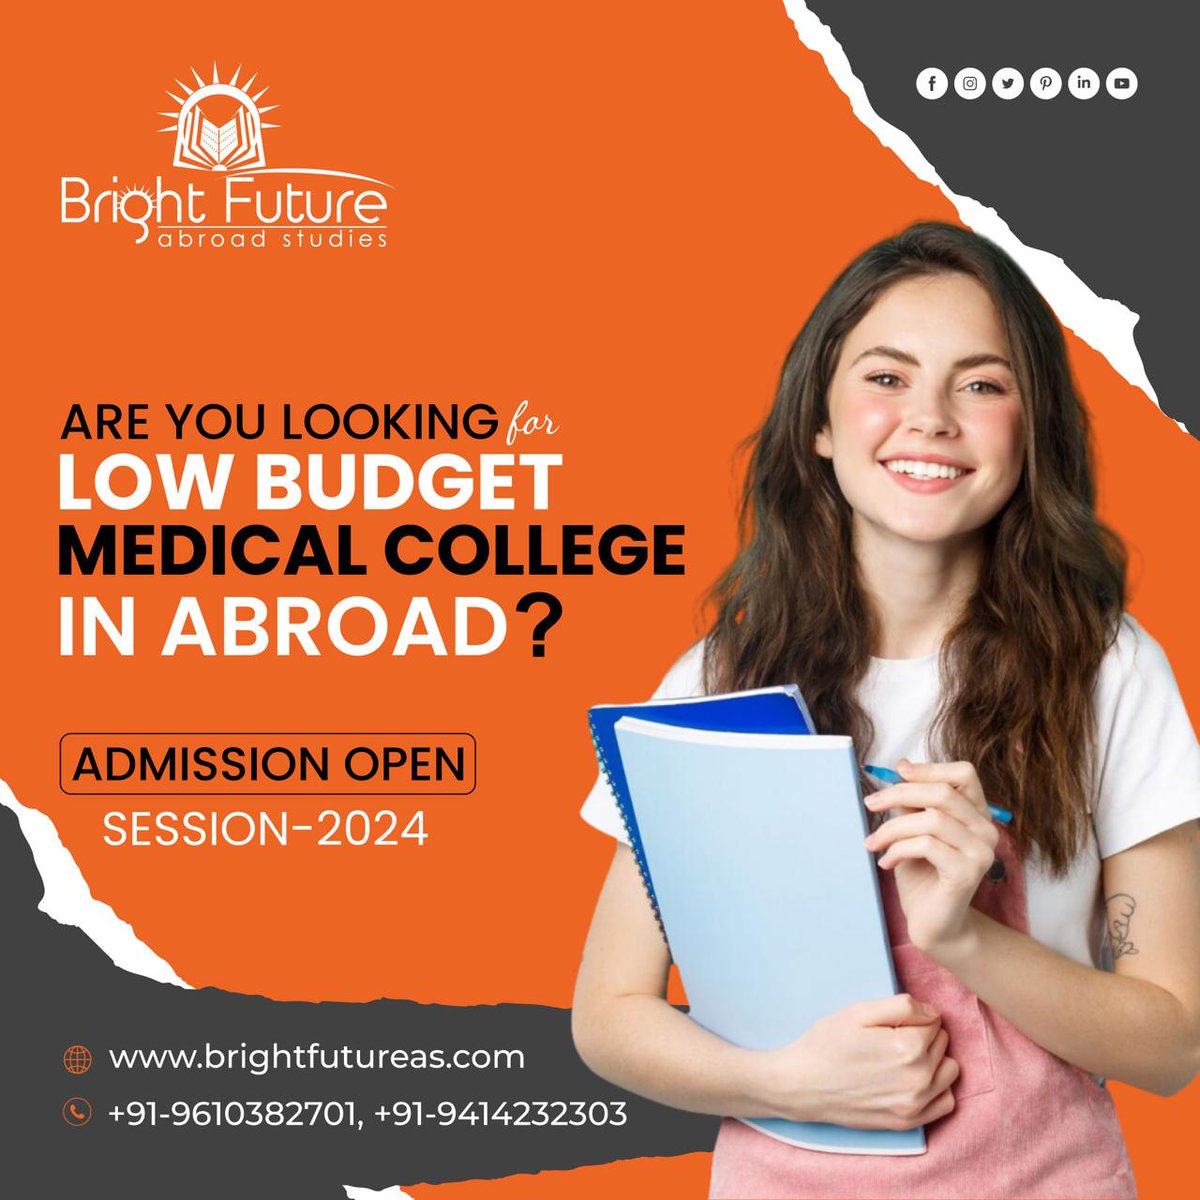 Dream of becoming a Doctor ⚕️? Pursue #mbbsabroad at an affordable cost!!
Admissions are open for the 2024 batch!!
Unlock your medical career and apply for a Budget-friendly MBBS program abroad.
Make your MBBS dream a reality 
#studyoverseas  #mbbseducation  #brightfuture